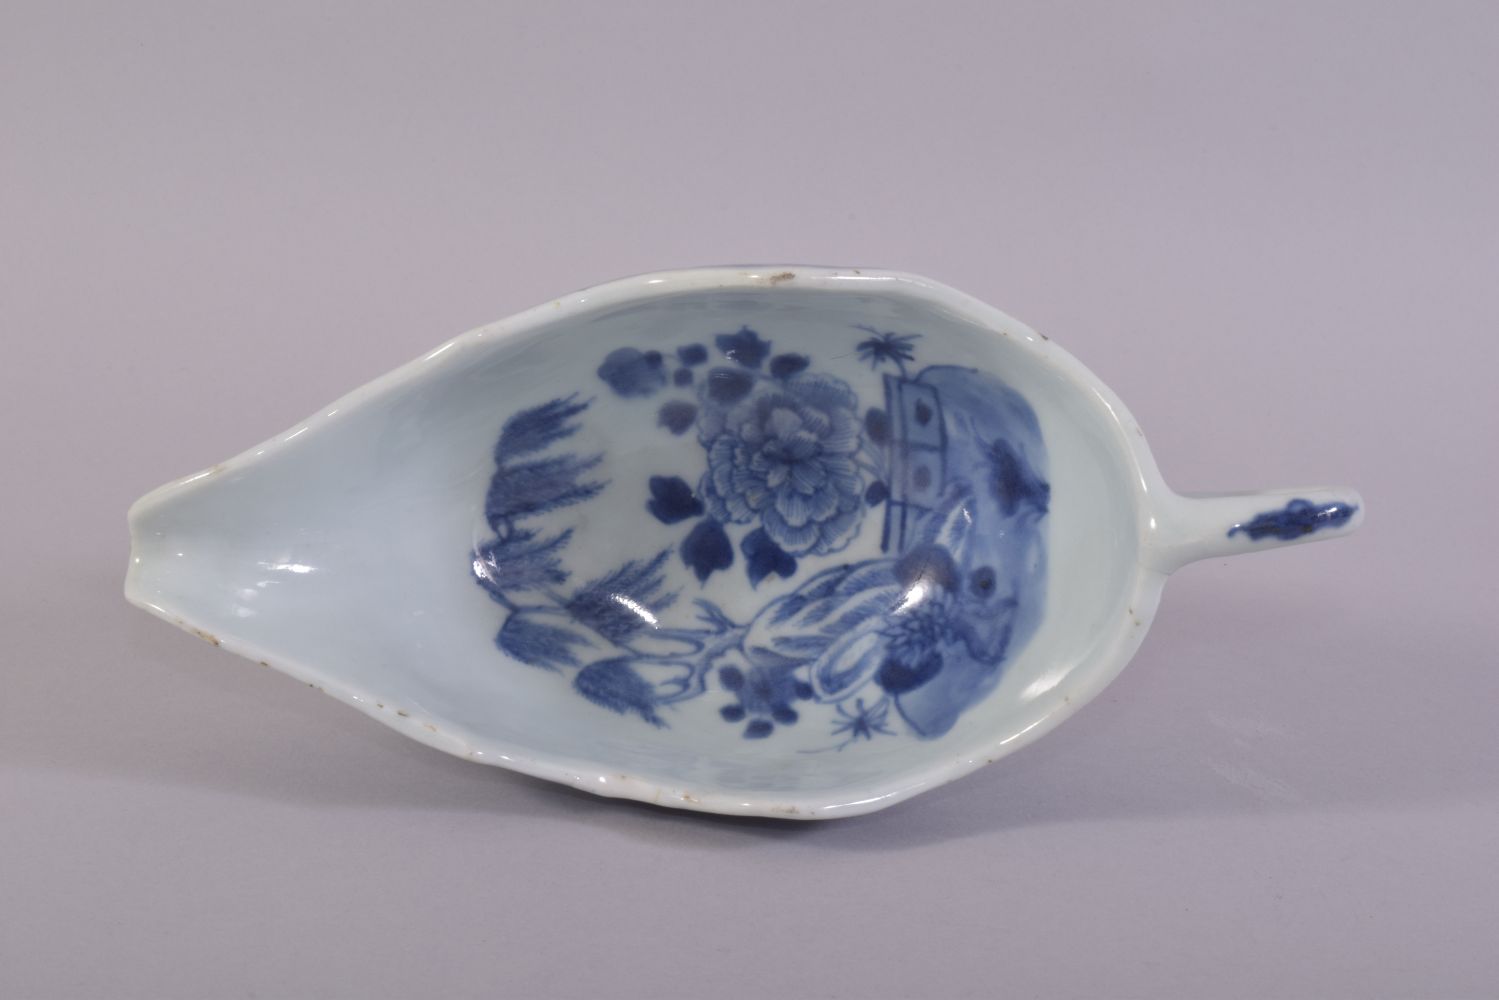 A CHINESE BLUE AND WHITE PORCELAIN SAUCE BOAT, the interior decorated with native flora, 21.5cm - Image 5 of 6